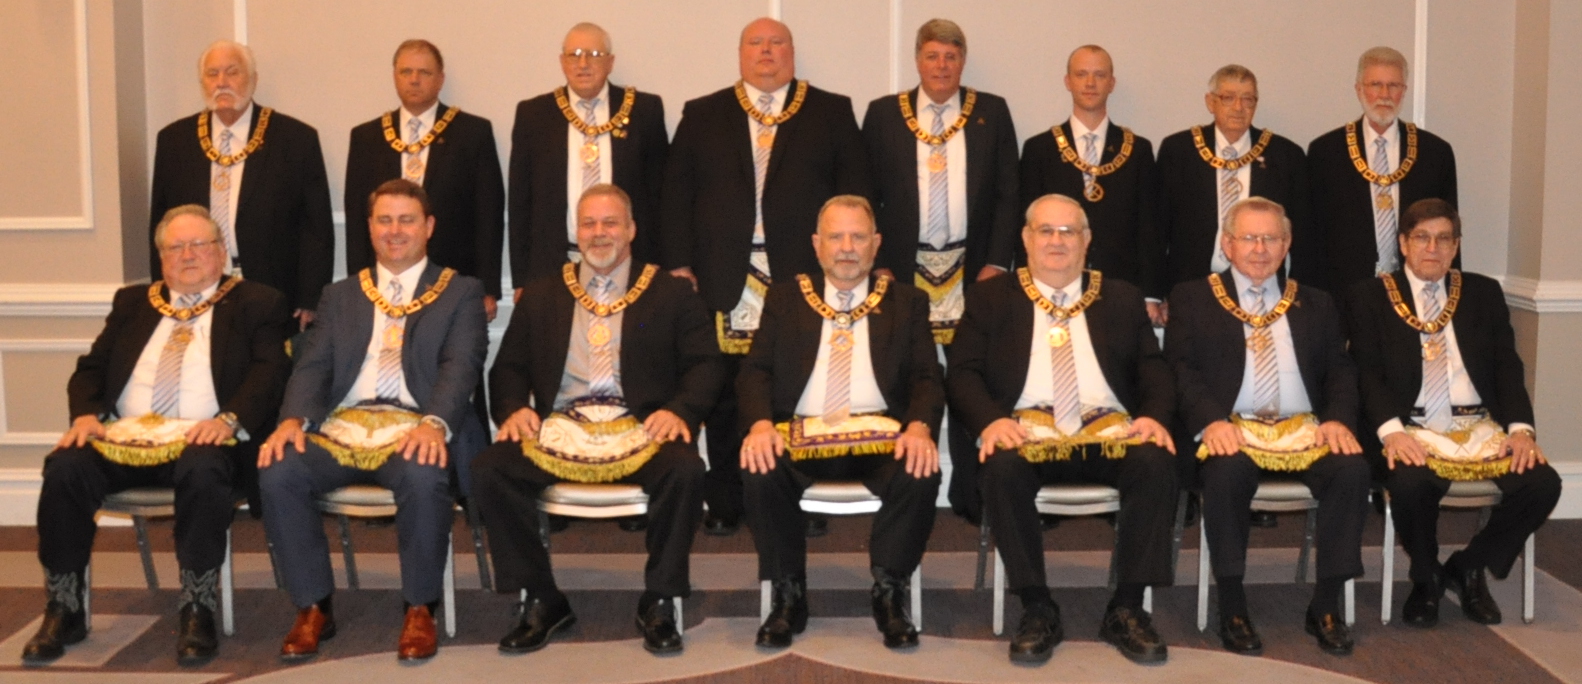 Grand Lodge Officers - The Grand Lodge of Mississippi F∴ & A∴ M∴